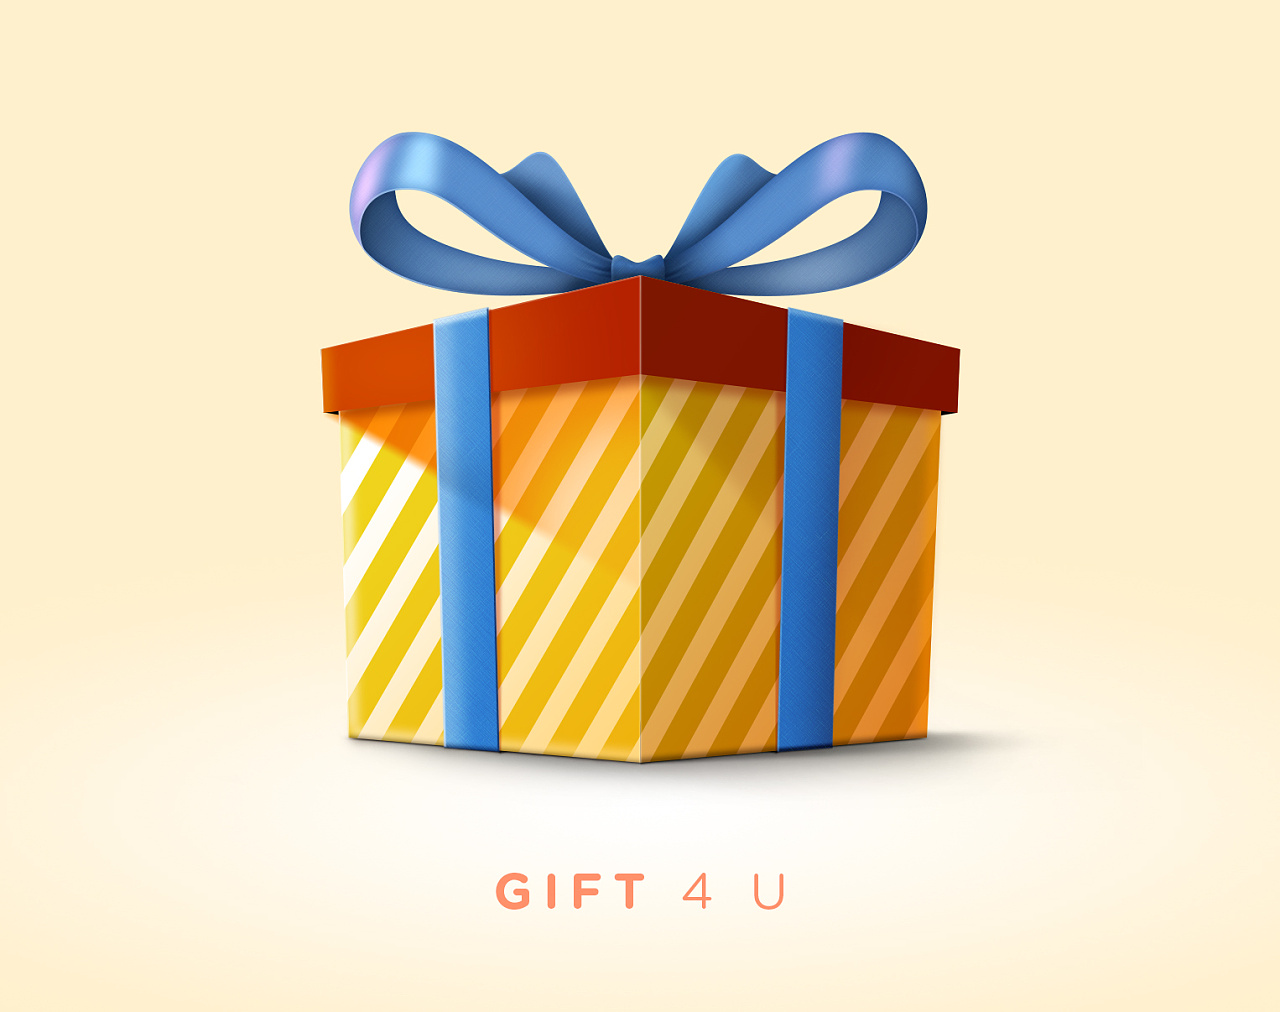 gift for you!